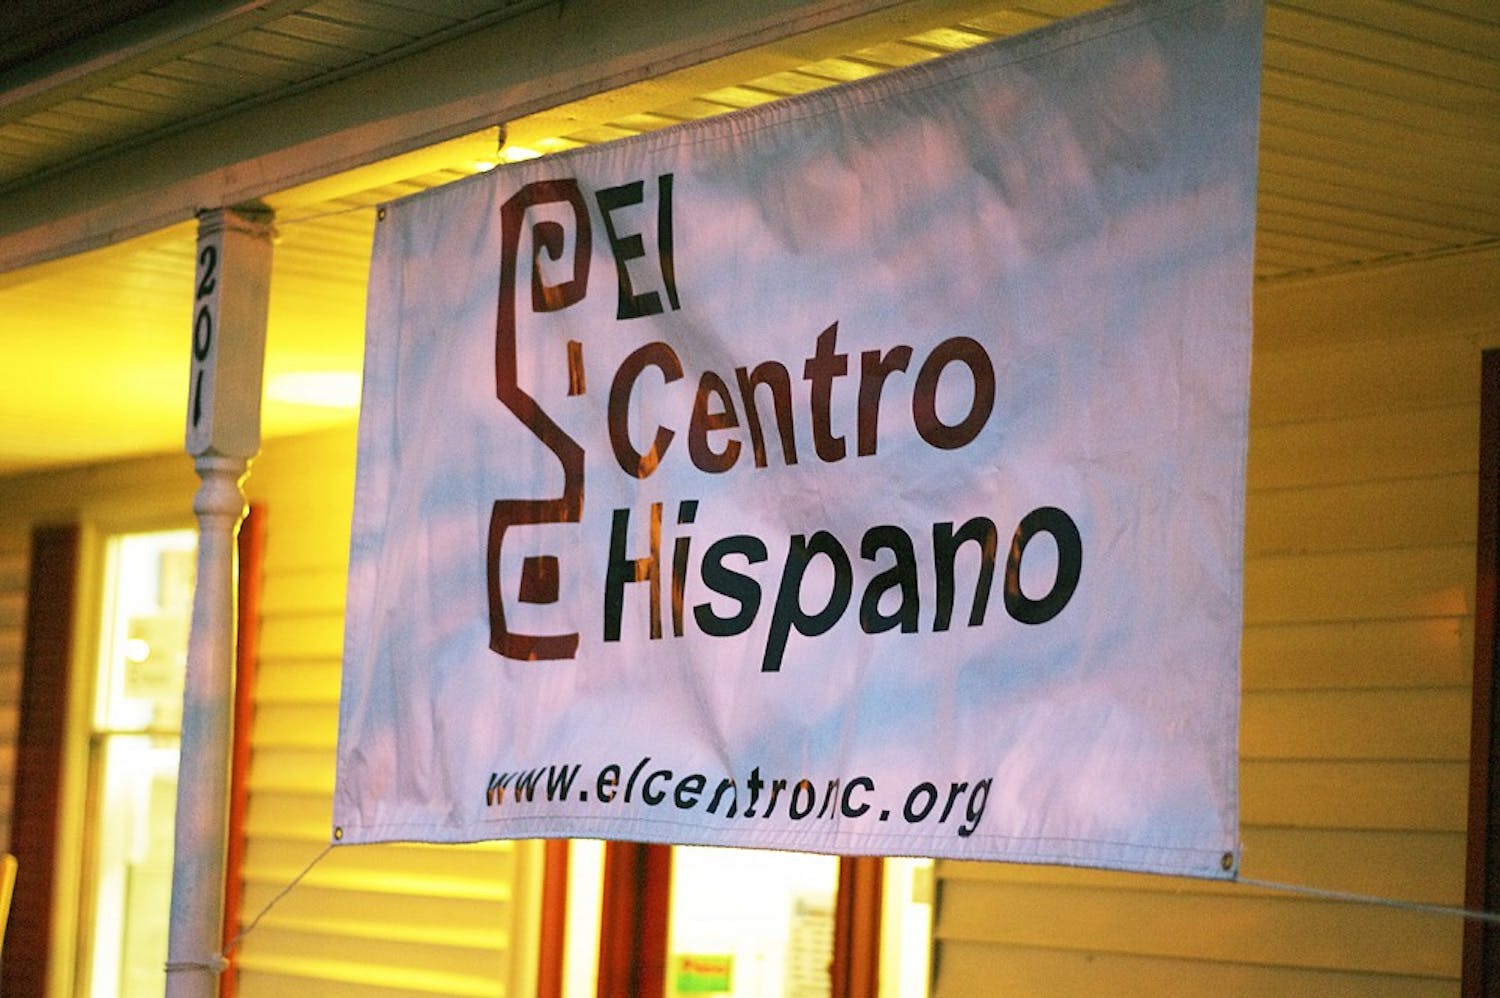 El Centro Hispano had their open house for their new location on W Weaver Street in Carrboro. The new location is more accessible to residents of Chapel Hill and Carrboro, creating a platform for Latinos to better engage with their community. 